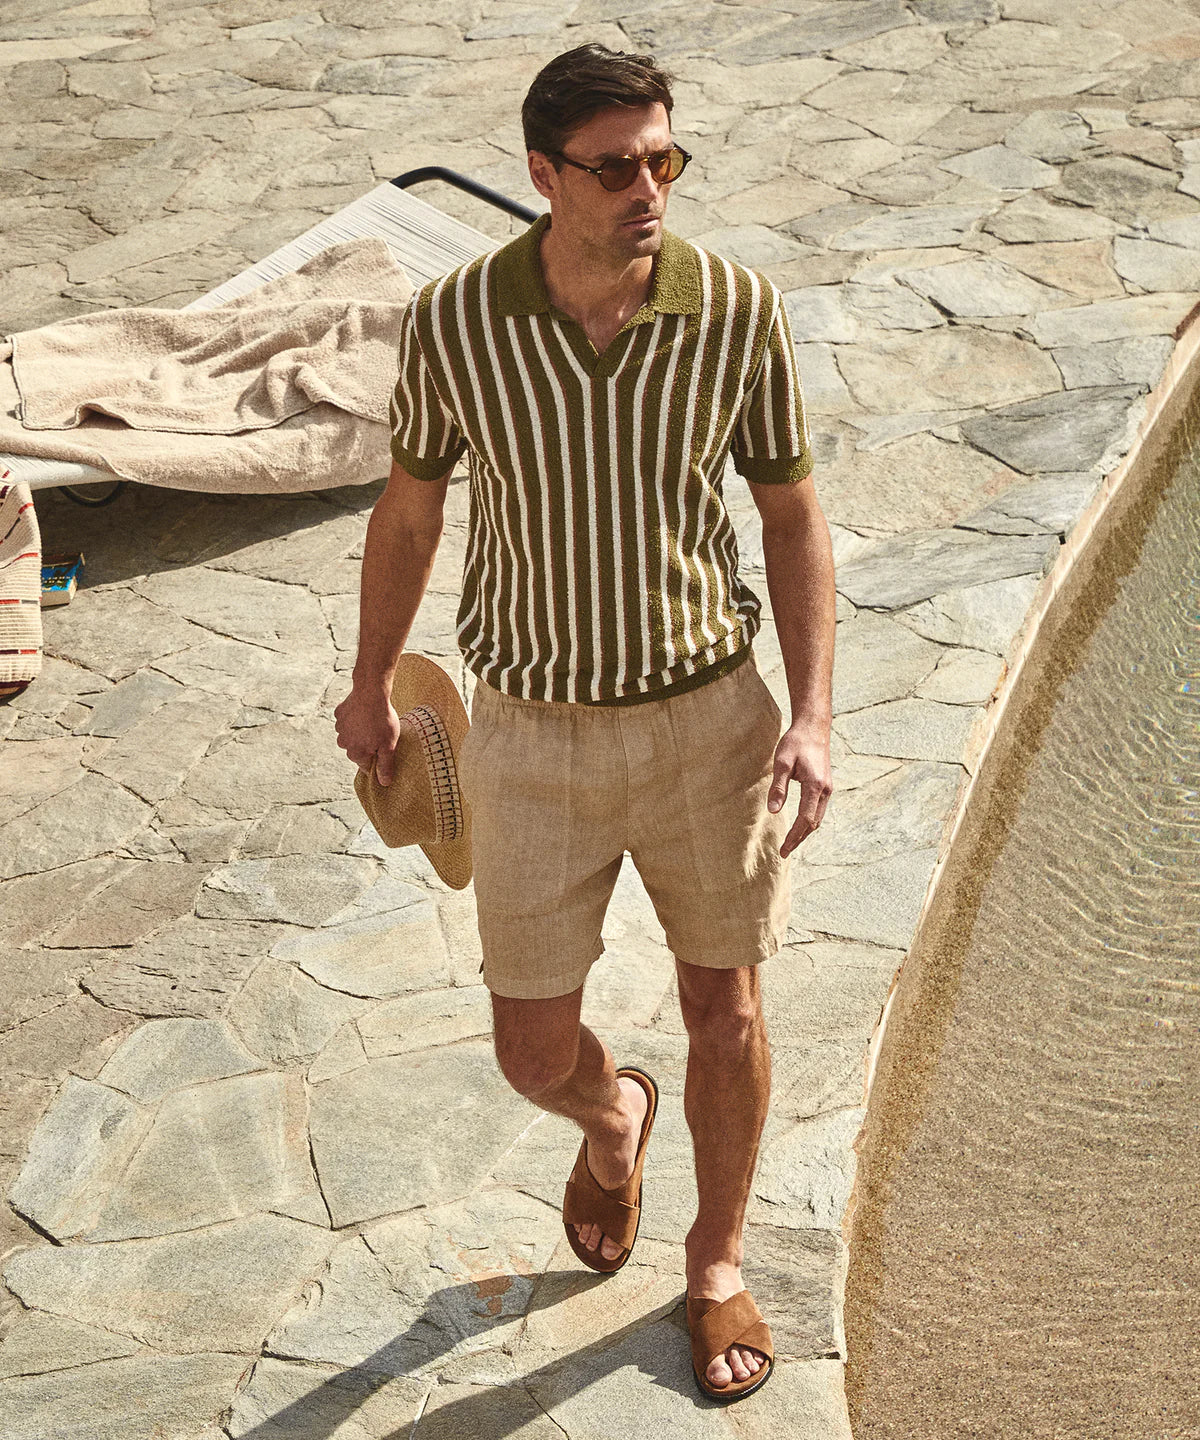 Todd Snyder - TODD SNYDER STRIPED BOUCLE MONTAUK POLO IN OAK MOSS - Rent With Thred